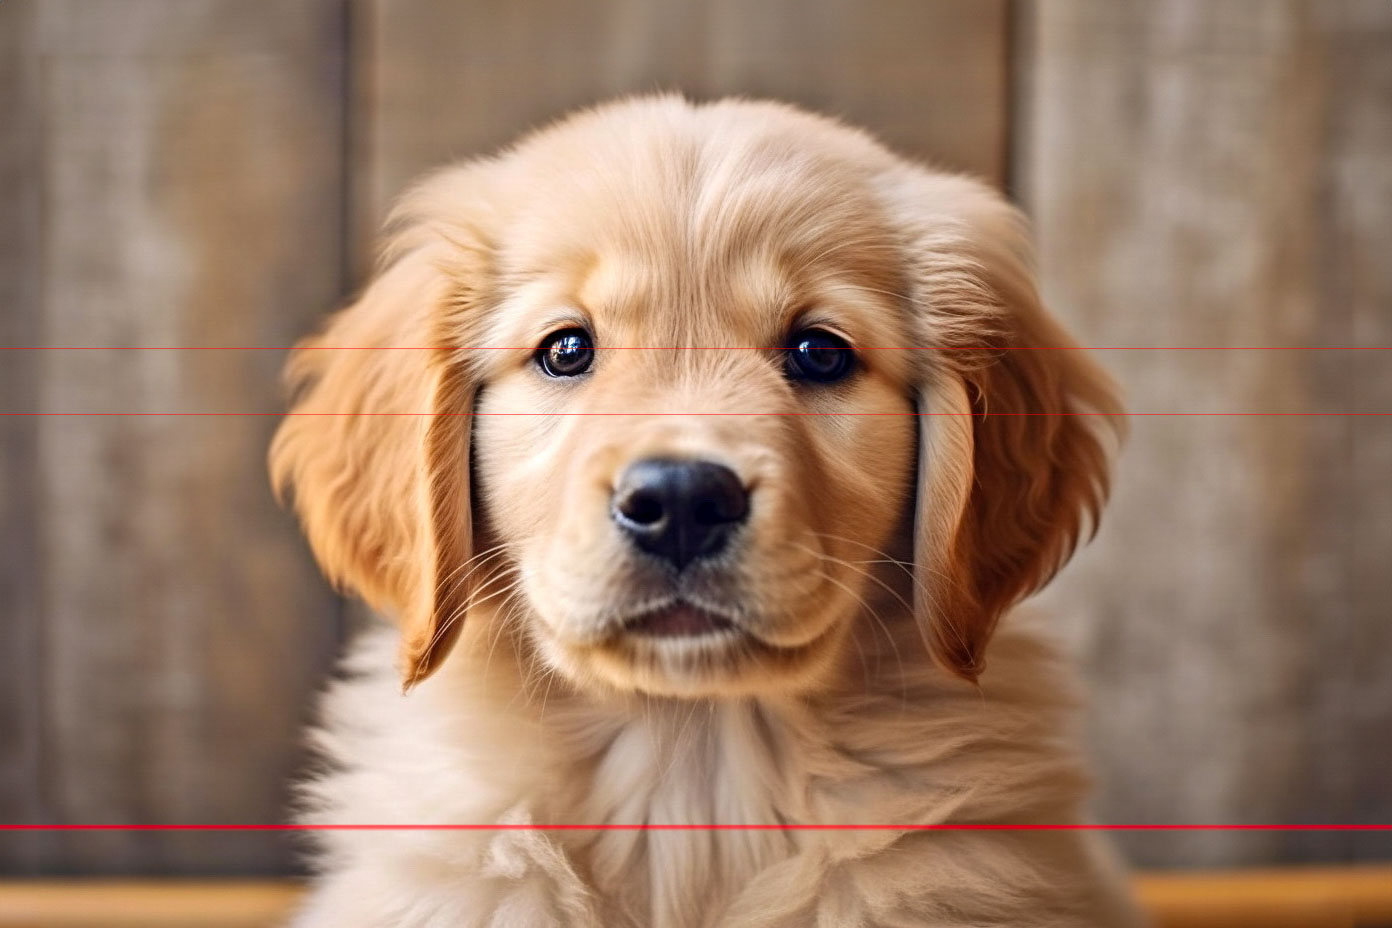 A close-up picture of a fluffy, golden retriever puppy against a wooden background. The puppy's wide, curious eyes and slightly parted mouth give it an adorable and inquisitive expression. Soft, light golden fur and floppy ears frame its face.